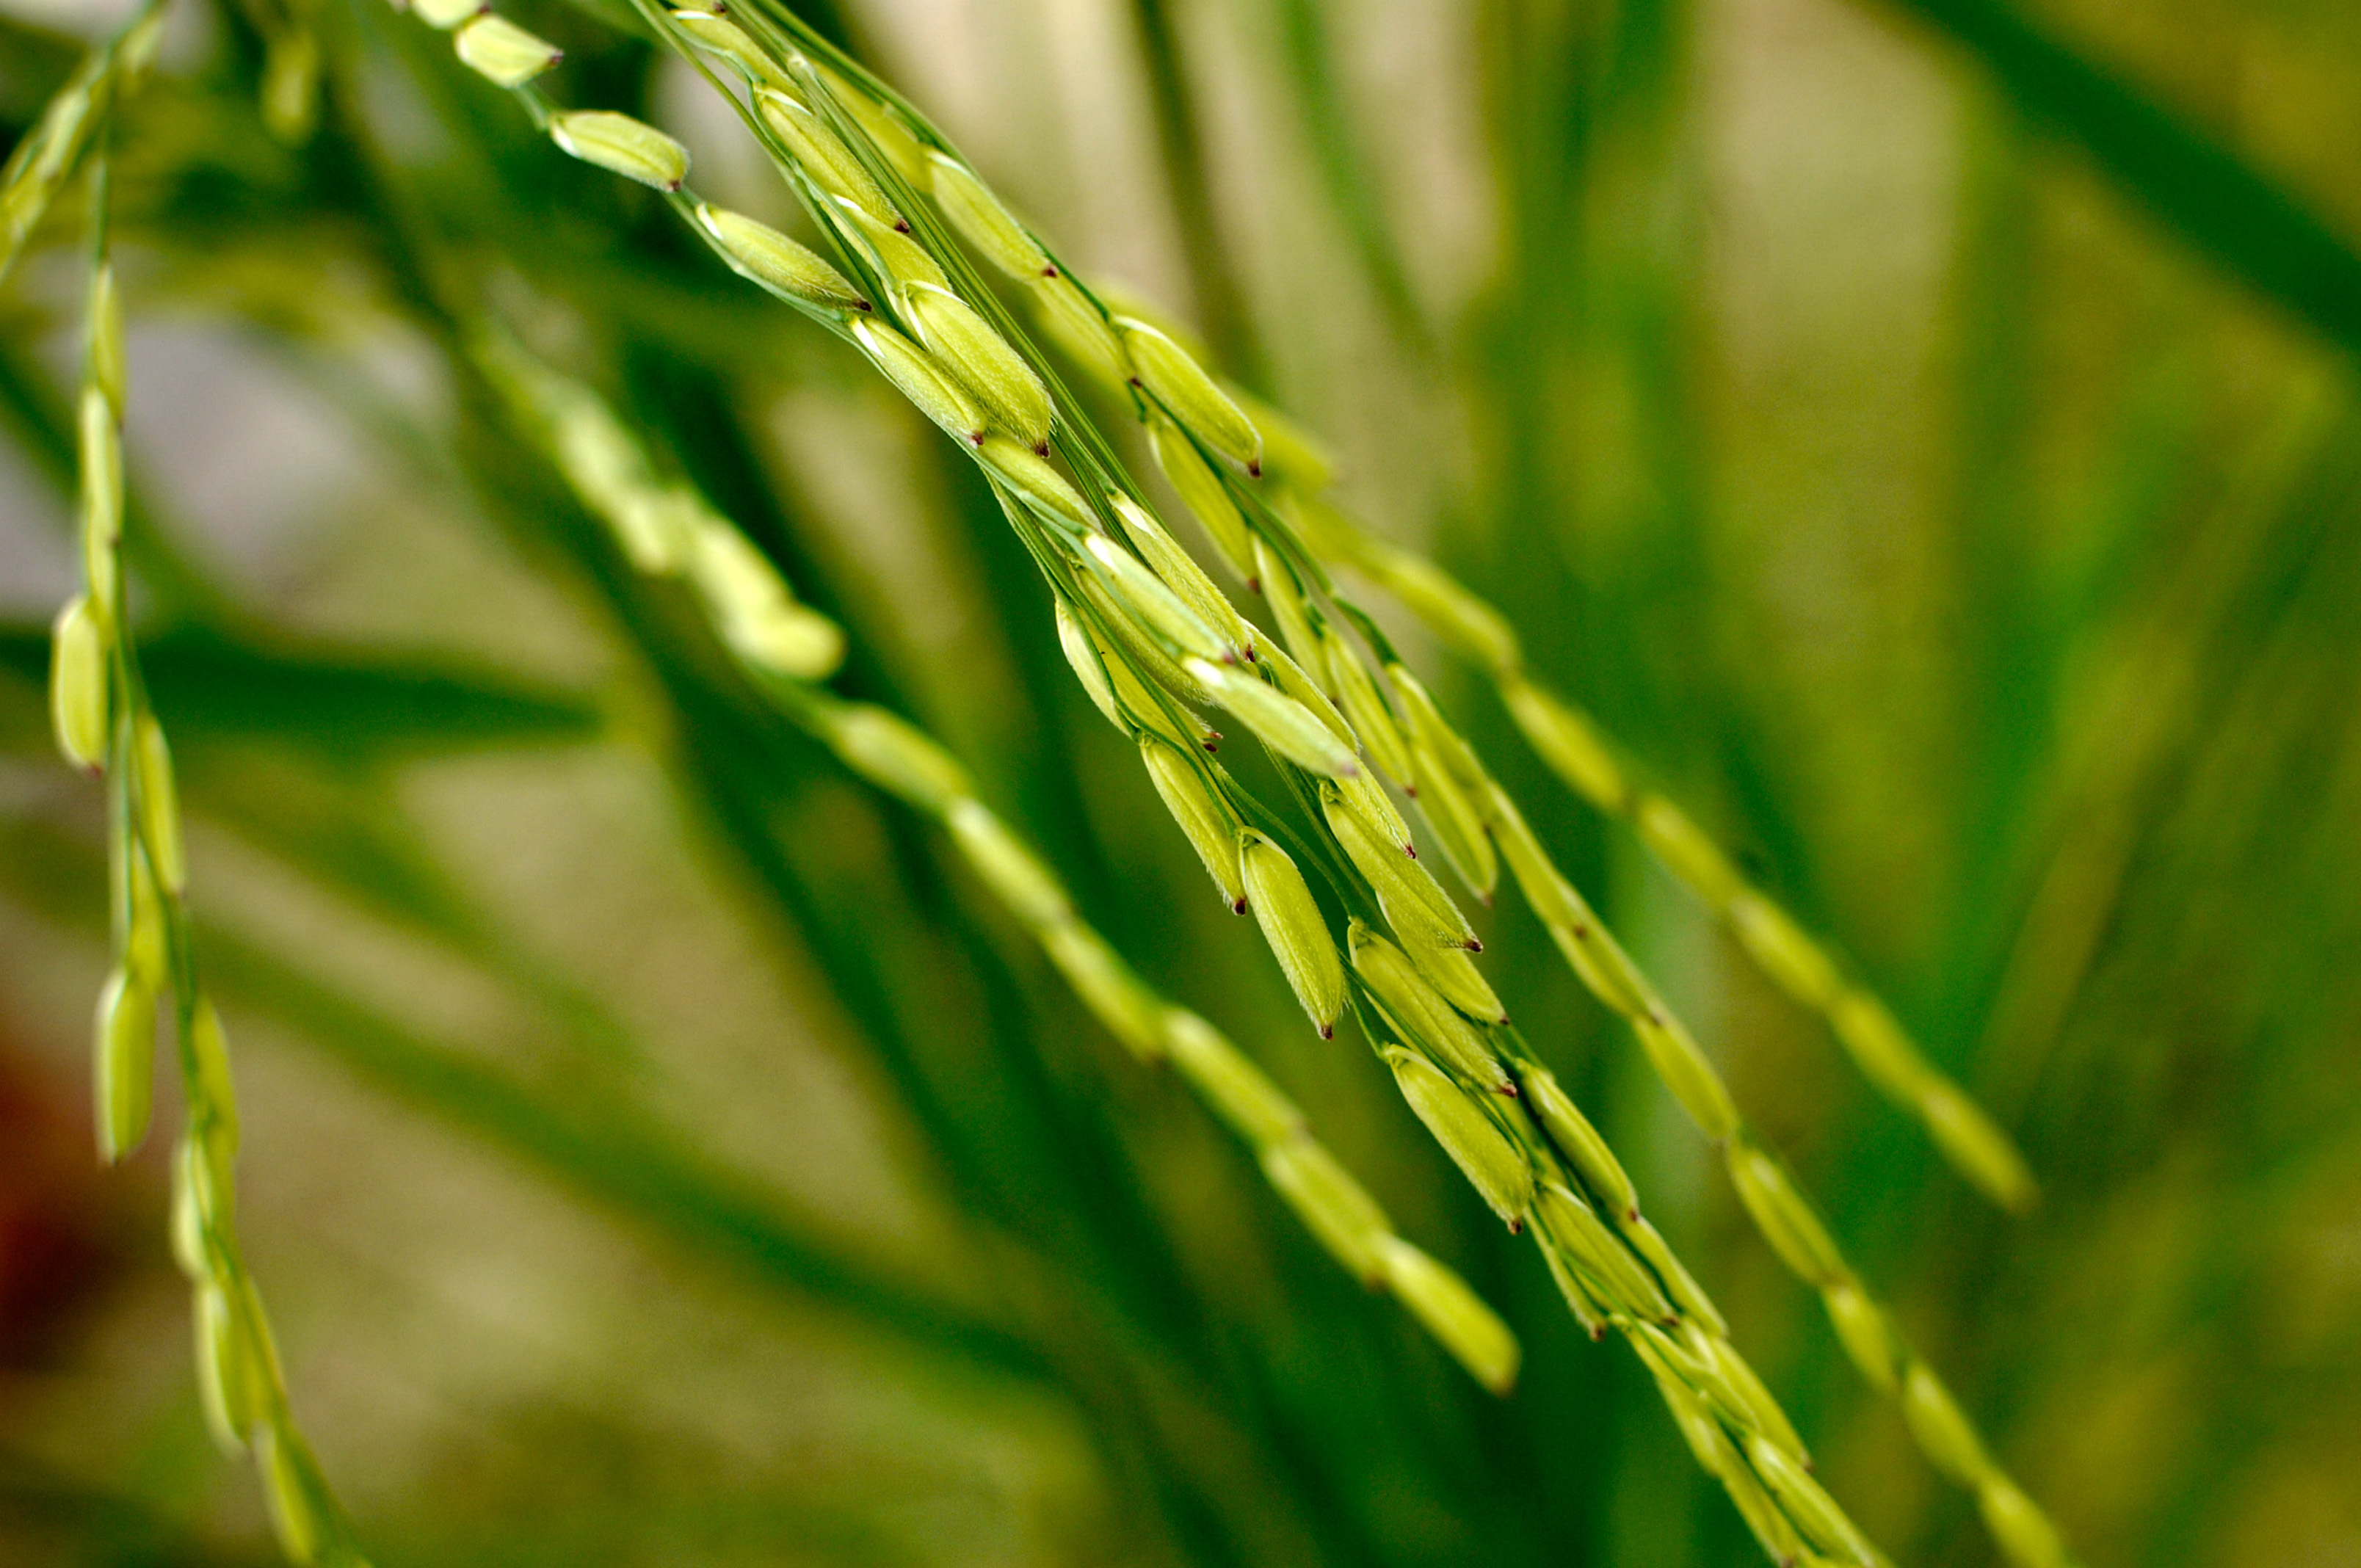 A panicle of traditional basmati (Basmati 370) cultivated in Ranbir Singh Pura and adjoining villages in the Jammu region. (Photo: IRRI)